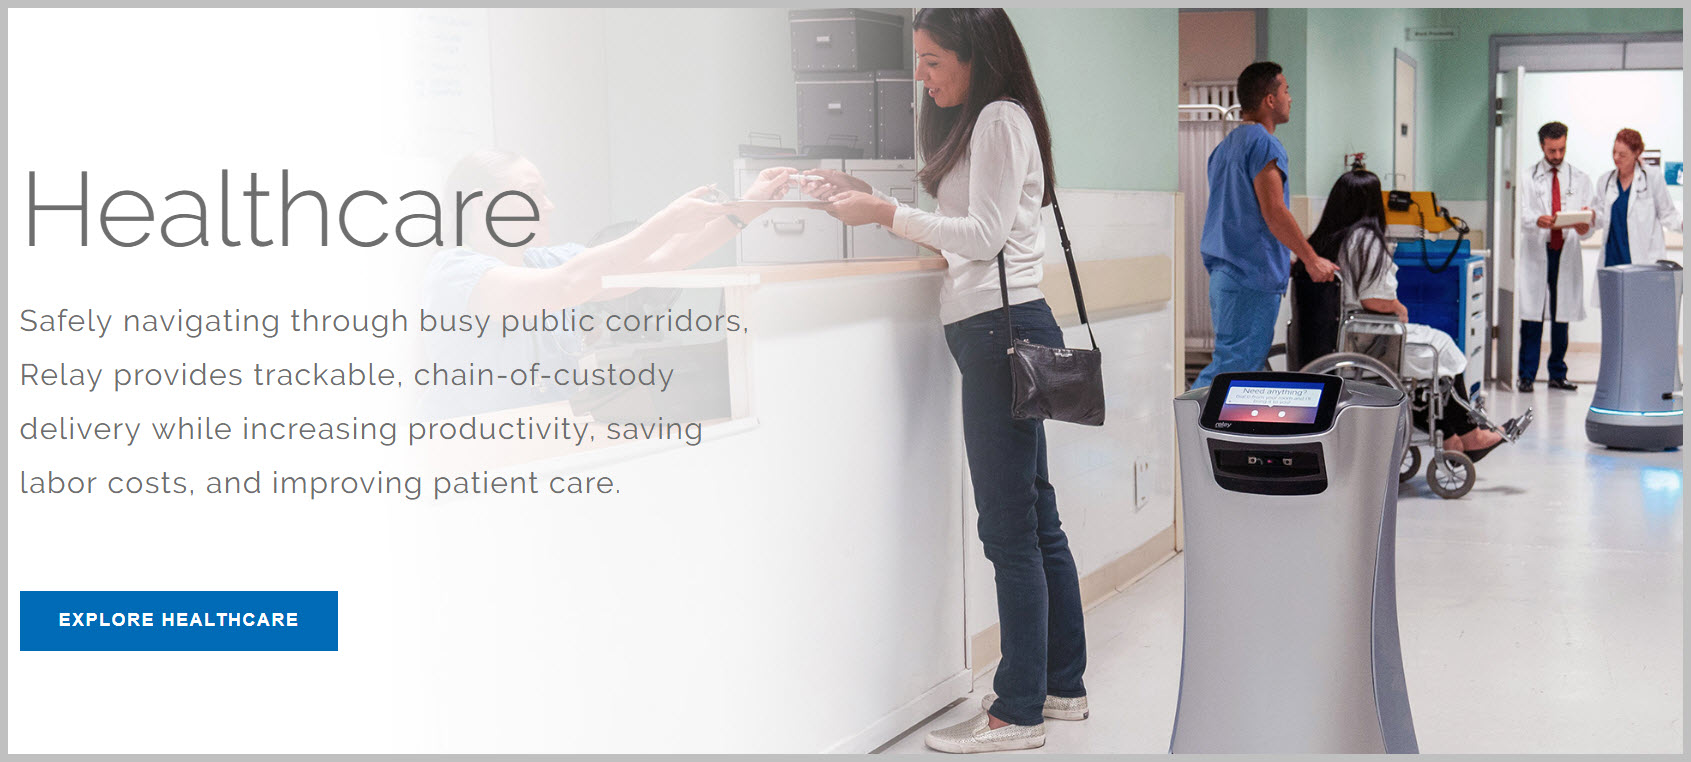 Safely navigating through busy public corridors, Relay provides trackable, chain-of-custody delivery while increasing productivity, saving labor costs, and improving patient care.